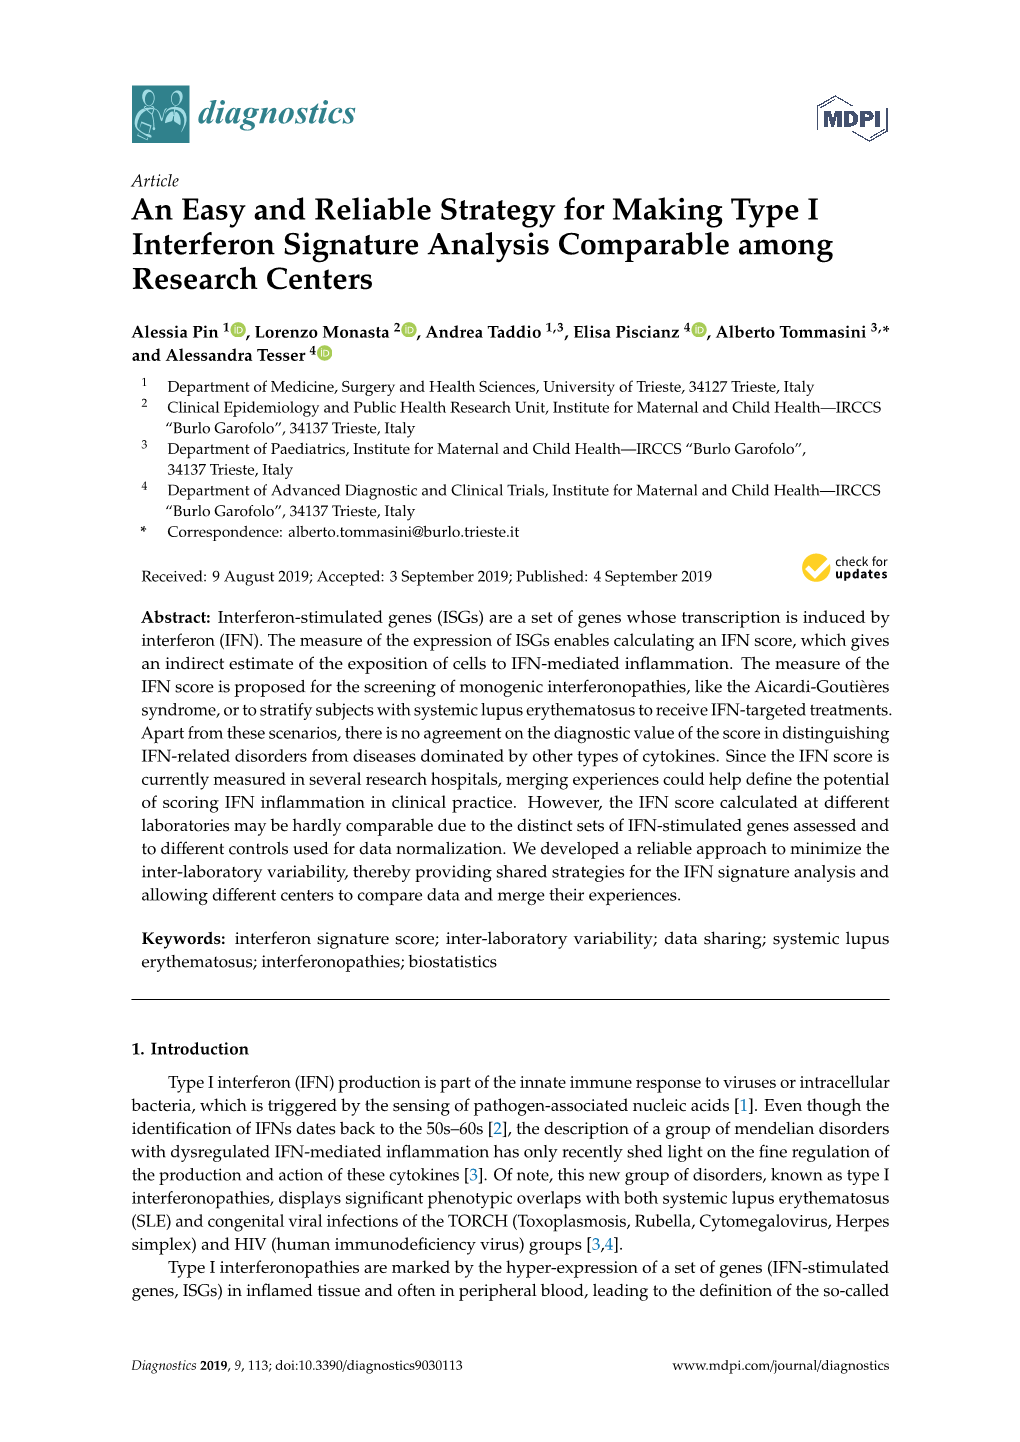 An Easy and Reliable Strategy for Making Type I Interferon Signature Analysis Comparable Among Research Centers